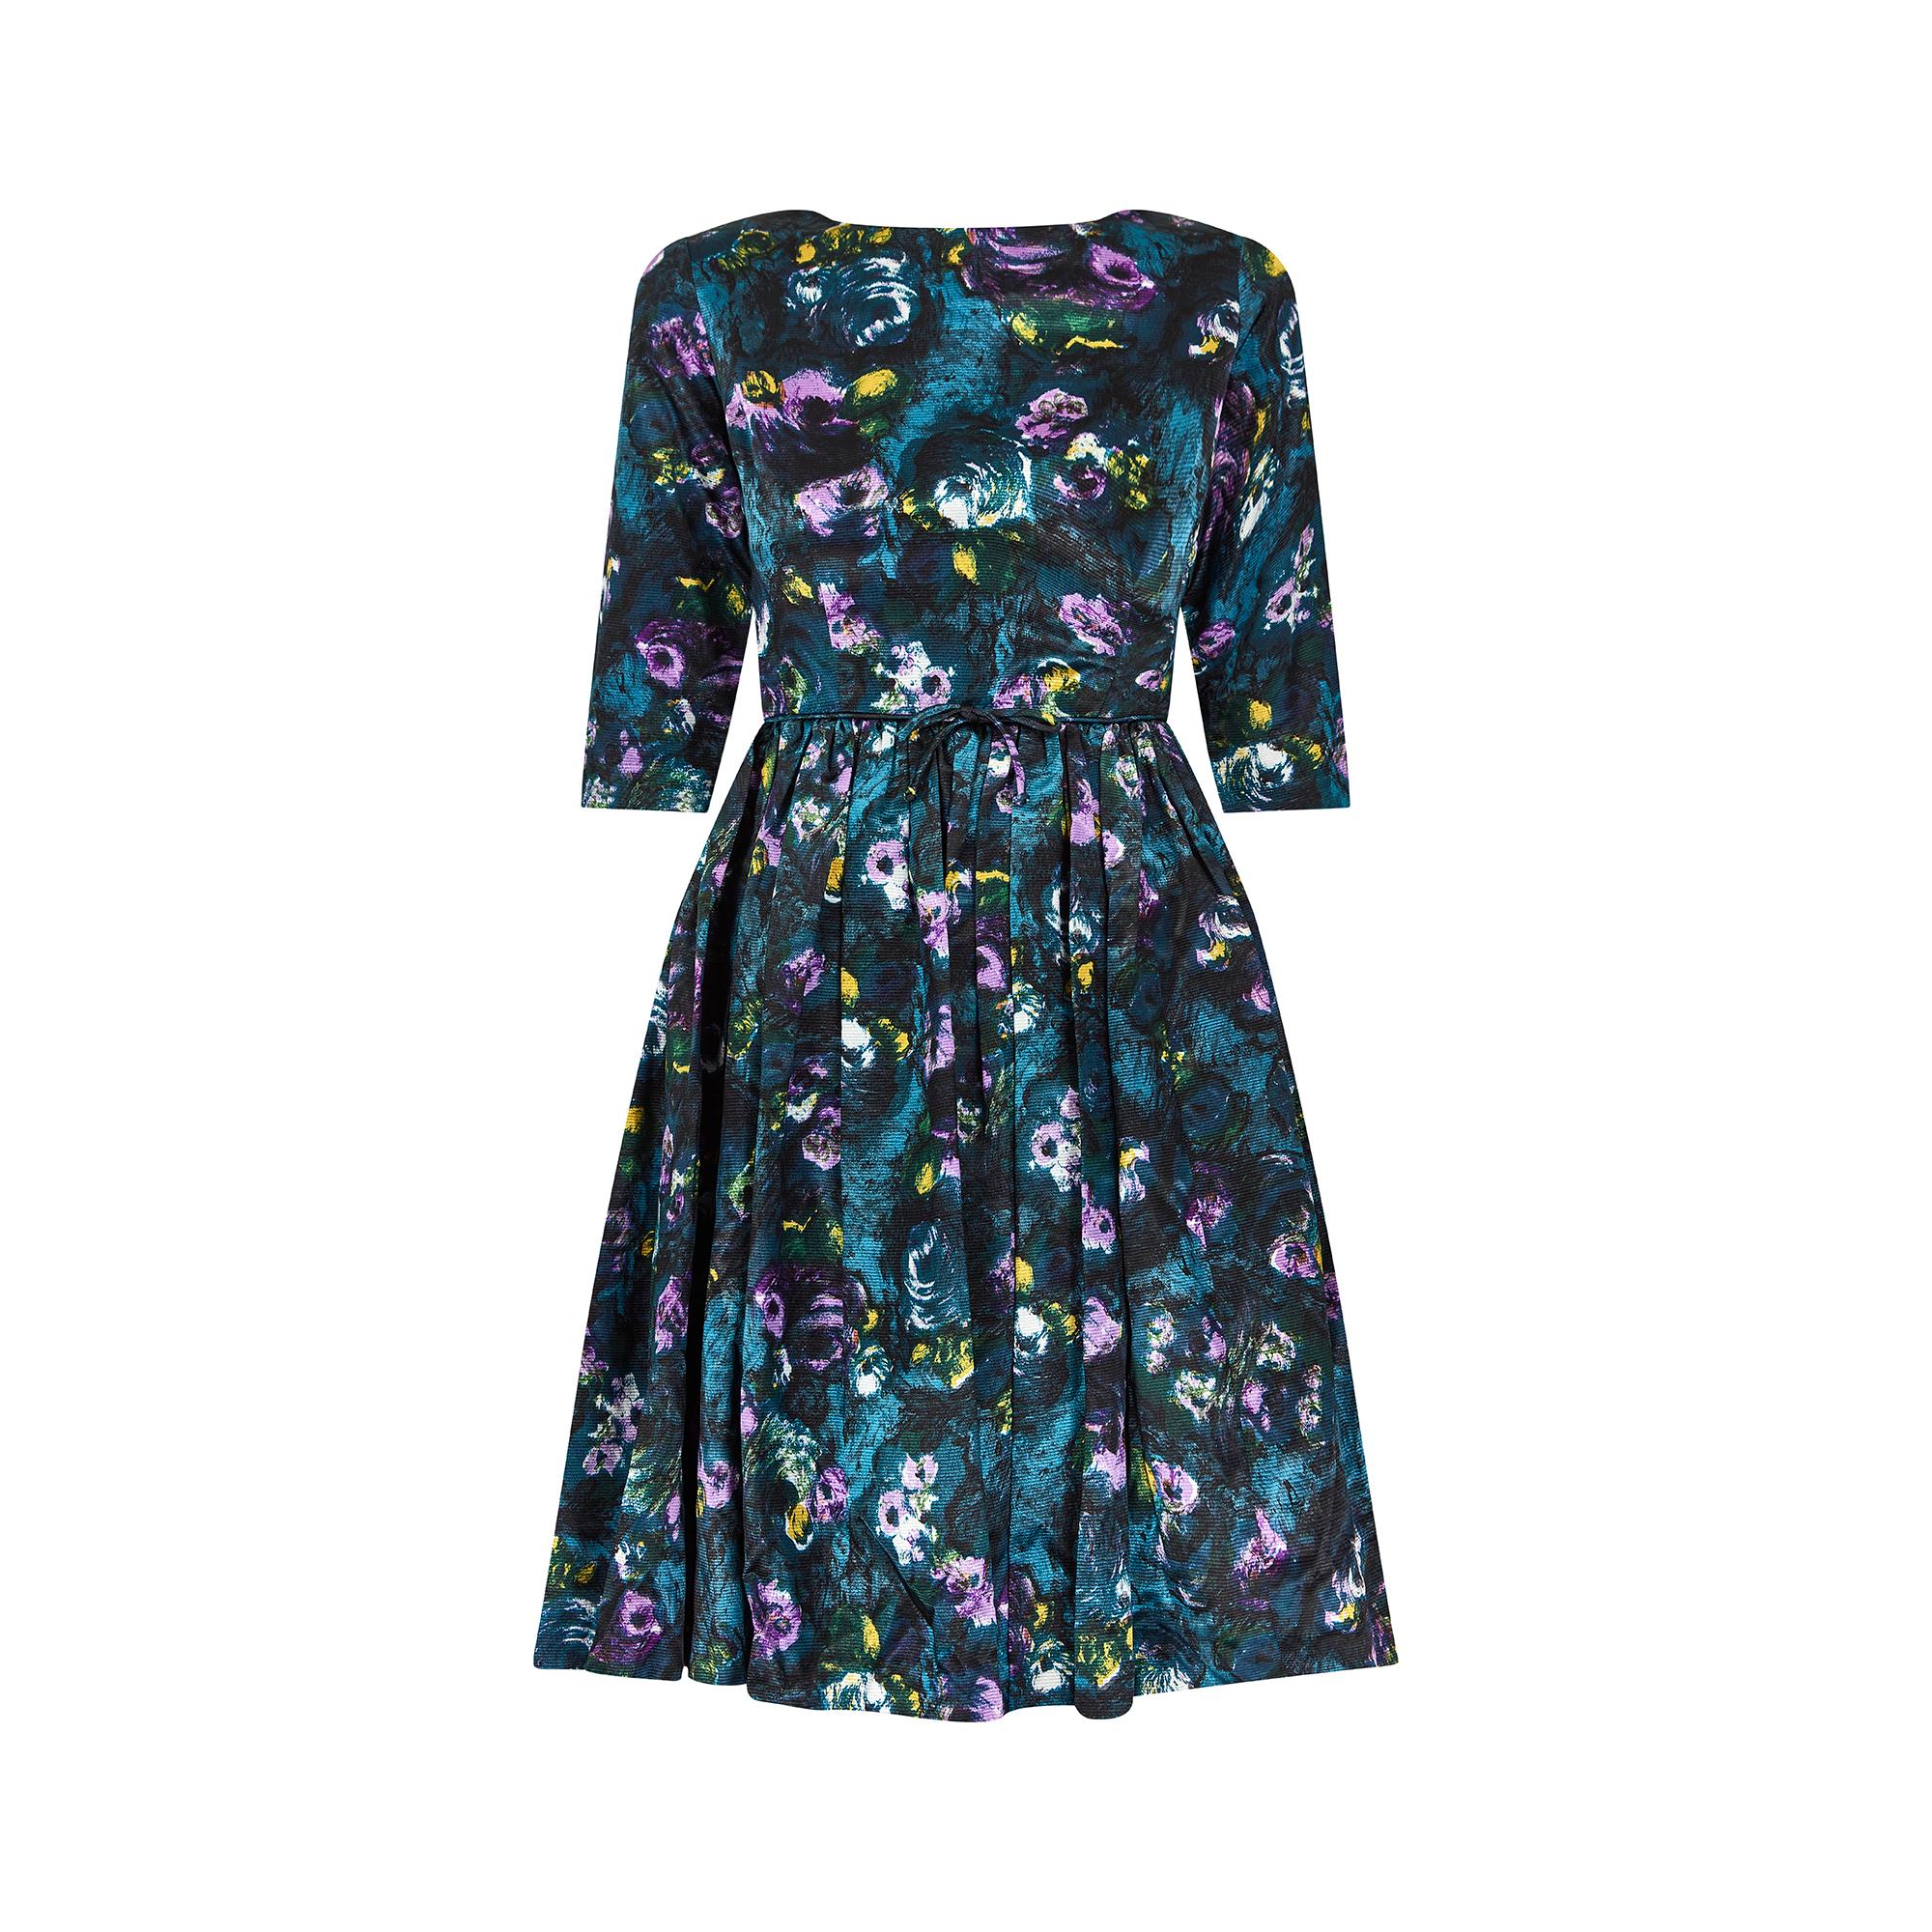 Superb example of an early 1960s day dress but could just as easily be worn in more formal settings or as a cocktail dress. Cut in a beautifully iridescent teal blue silk feel fabric, it has a high, rounded neckline, with three quarter length